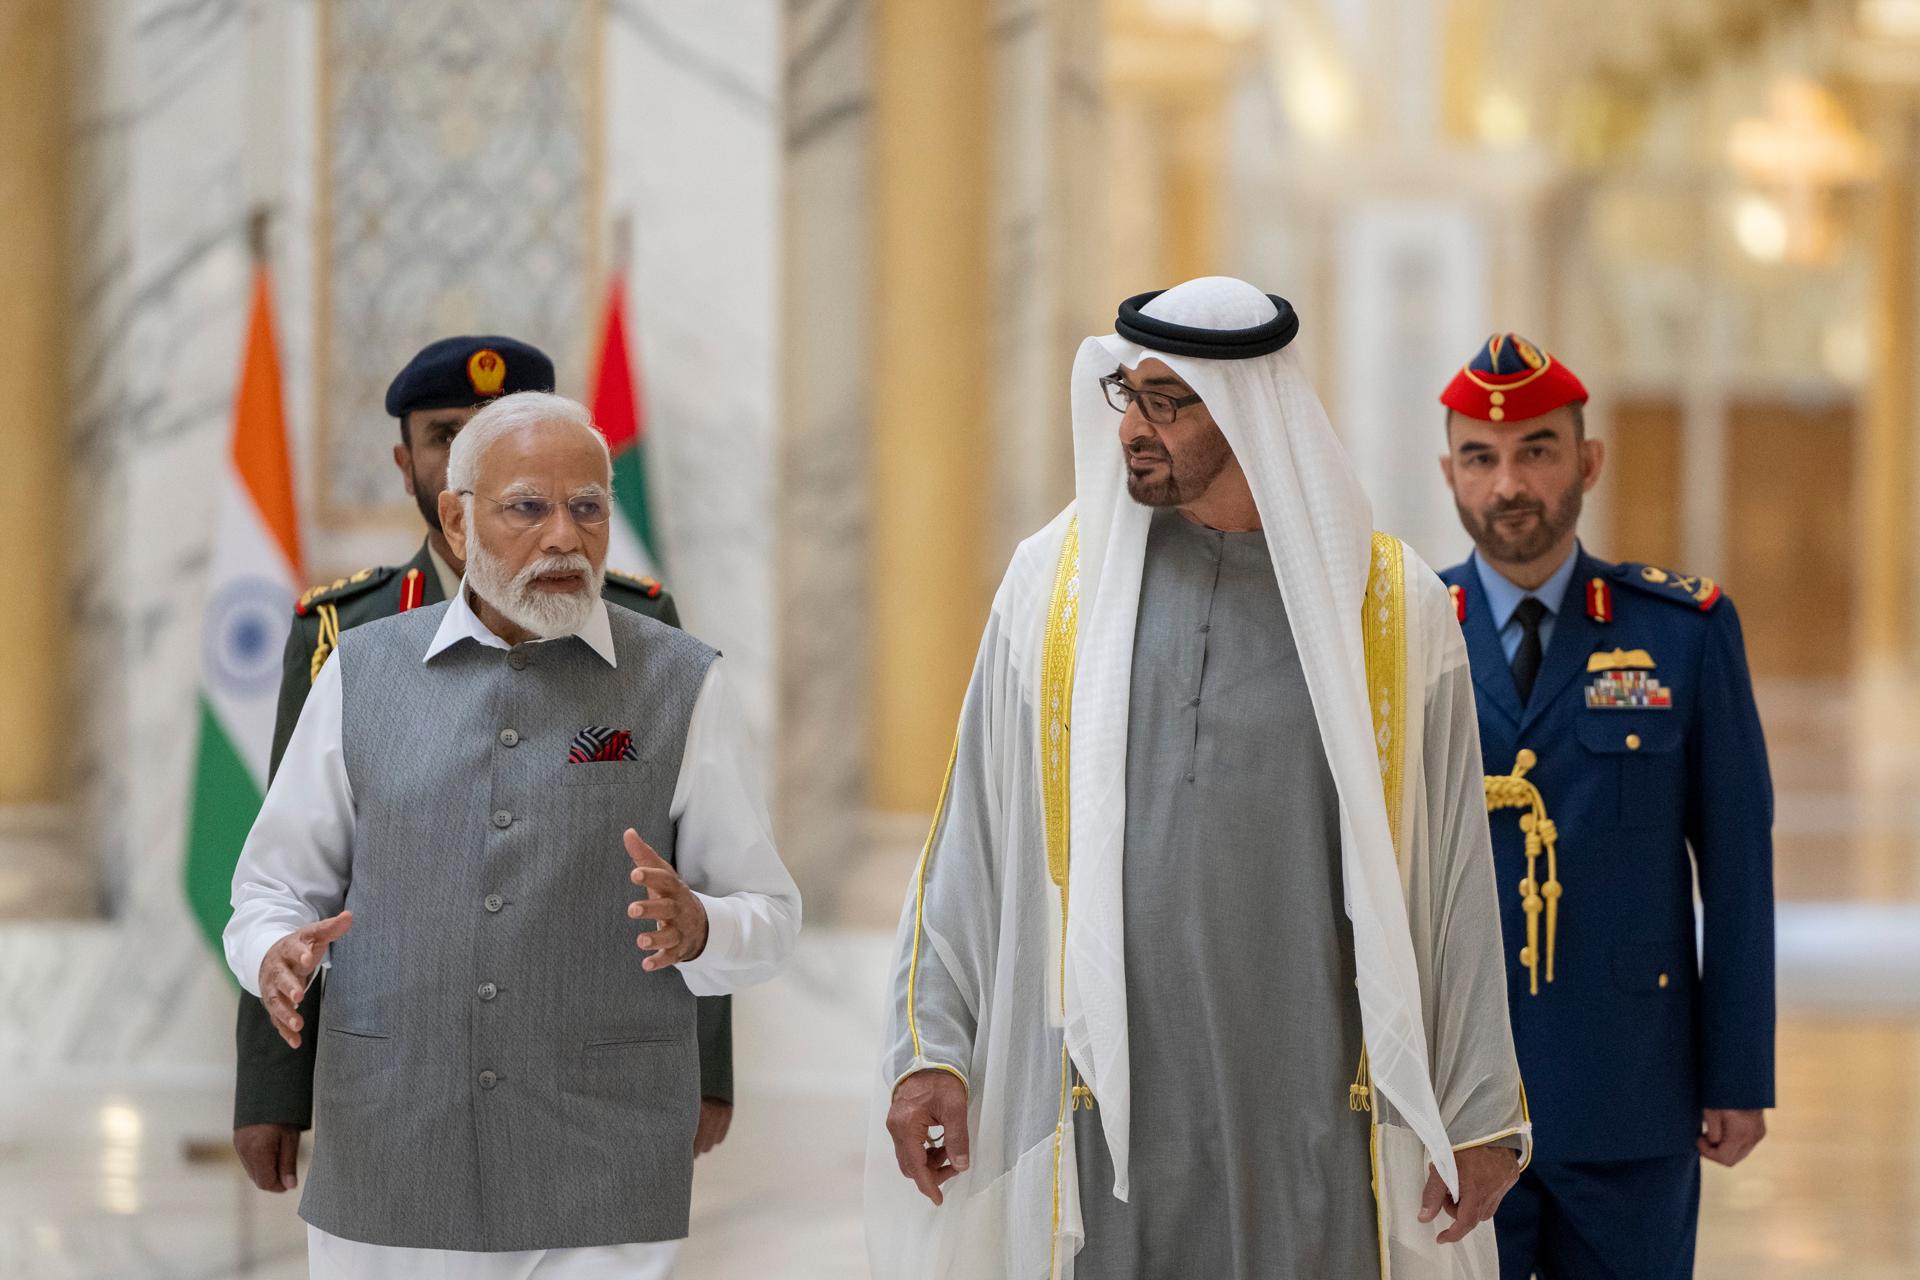 A handout photo made available by the UAE's Presidential Court shows President of the United Arab Emirates and Ruler of the emirate of Abu Dhabi Sheikh Mohamed bin Zayed Al Nahyan (R) meeting with Indian Prime Minister Narendra Modi (L), in Abu Dhabi, United Arab Emirates, 15 July 2023. EFE-EPA/UAE PRESIDENTIAL COURT HANDOUT "??? ?????? ??????? ??????? ?? ????? ??????? ????? ????? ??? ?? ??? ???????? ????????? ? / ?? ????????? ?????? ??????? ?????? ?? ?????? ??????. ??? ???? ??????? ??????? ???? ??? ???? ??? ???? ????????? ?? ???? ?????? ?? ?????? ?? ??????? ?? ????? ???? ???????? ?? ?????? ?? ???? ??????? ????? ?? ???? ??????? ?? ??????? ???? ????? ????? ???? ?? ???? ?? ????? ???? ???? ???????? ??????? ???????? ?? ????? ?????? ?? ????? ???????? ??????? ??????? ?? ?? ??? ???? ?????? ?? ??????". 
"This official UAE Presidential Court photograph is being made available only for publication by news organizations and/or for pe HANDOUT EDITORIAL USE ONLY/NO SALES
